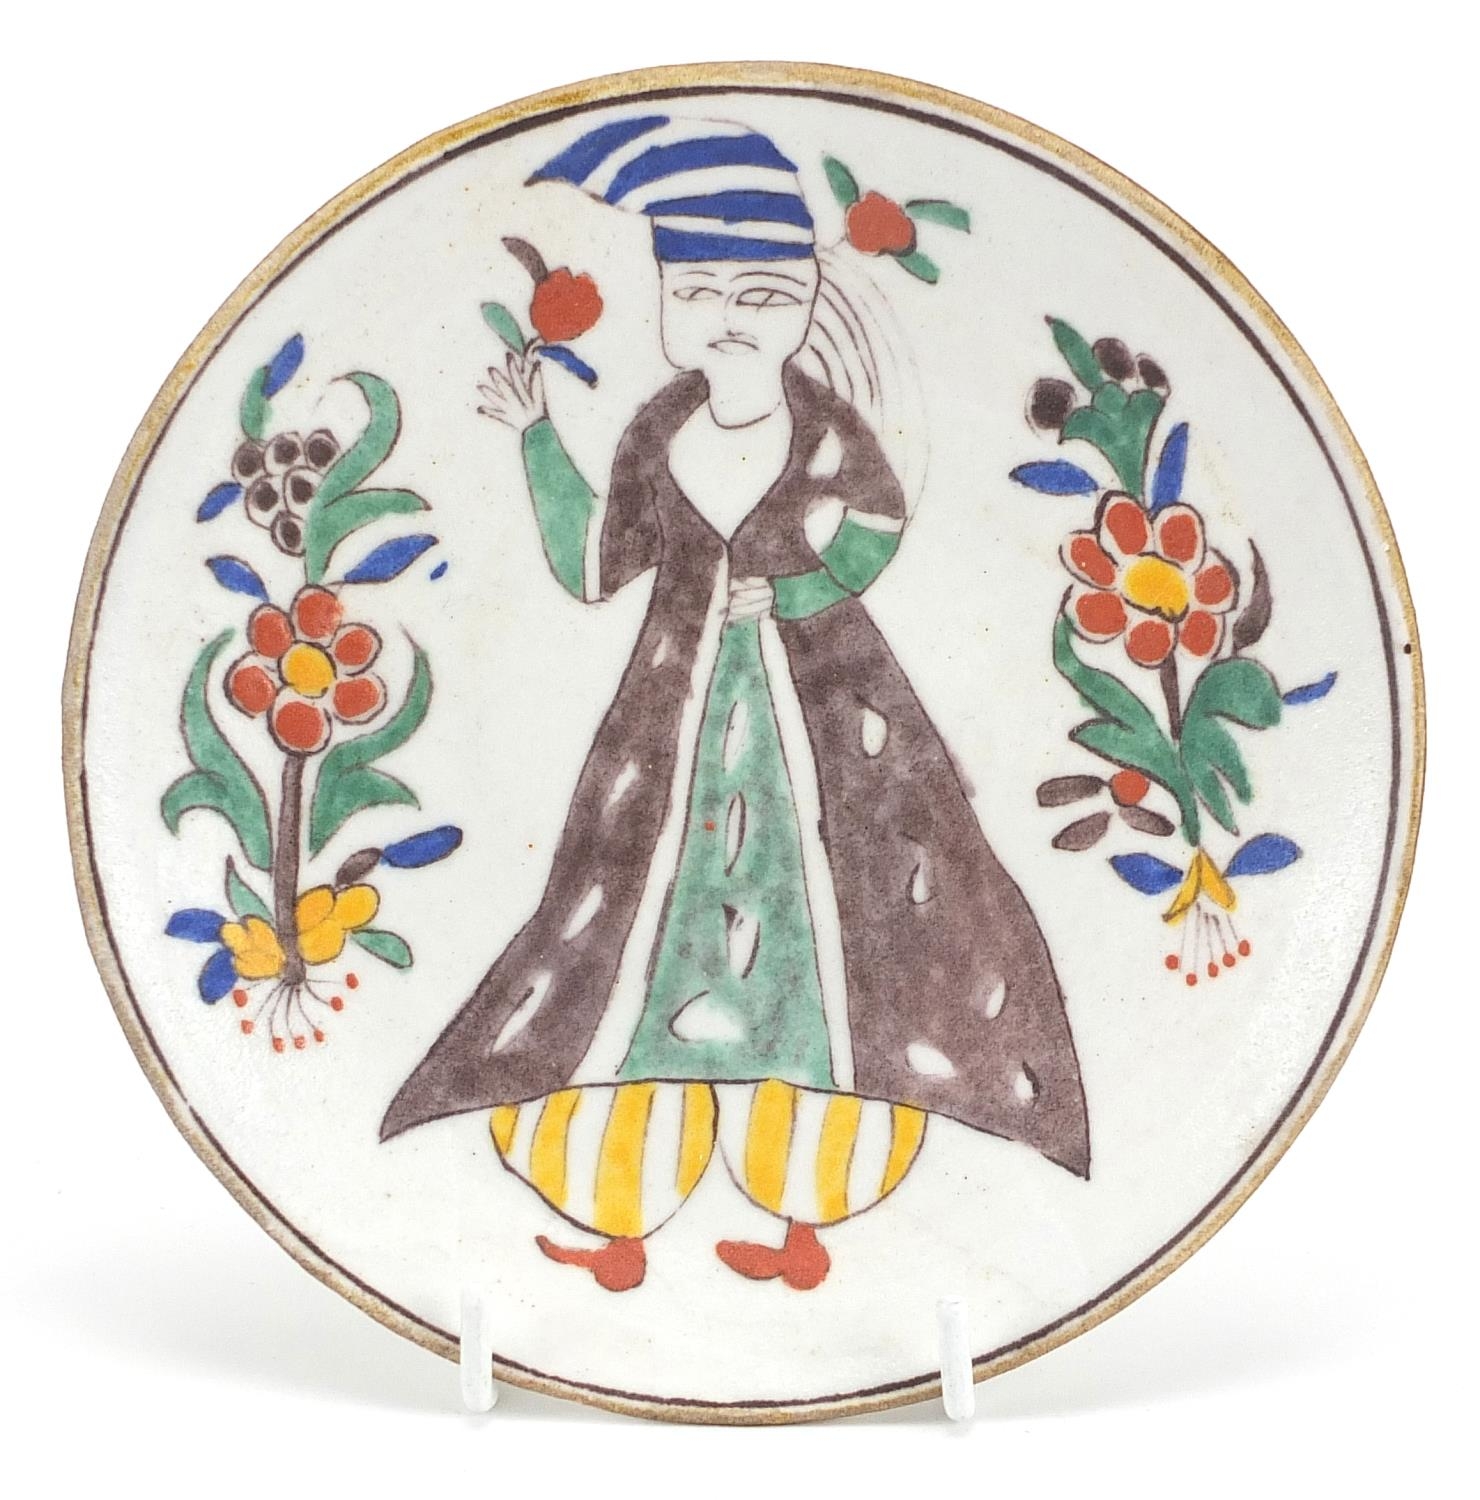 Turkish Kutahya pottery dish hand painted with a figure, 14.5cm in diameter